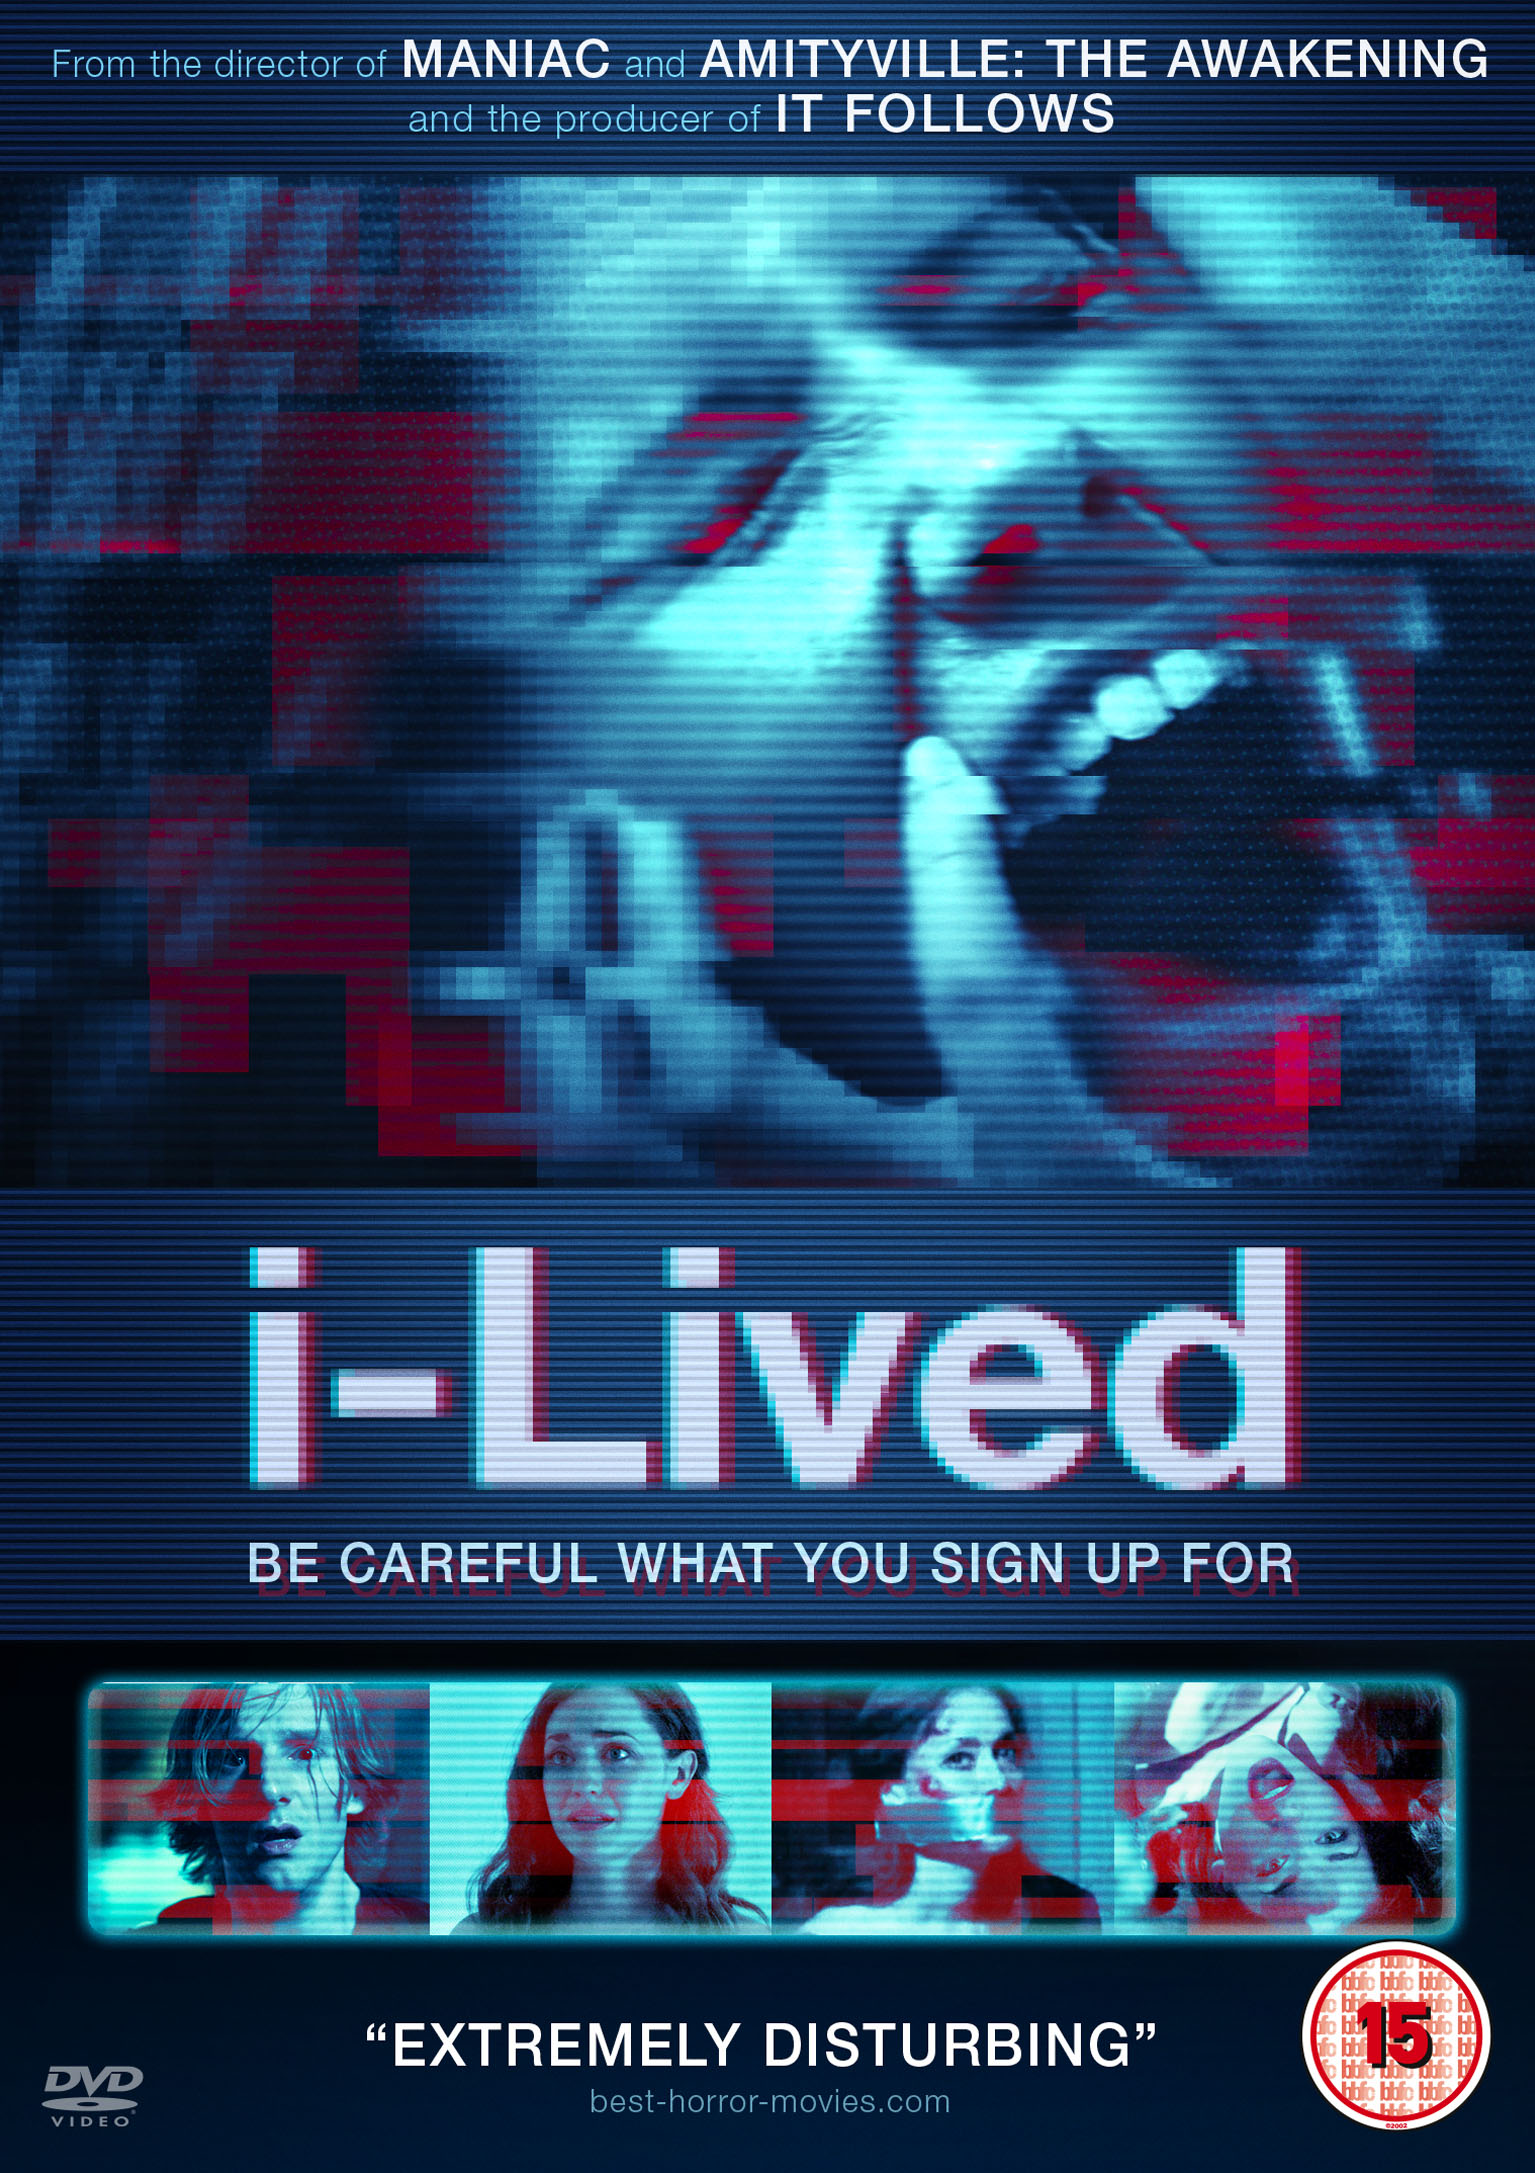 i-lived DVD review: App-based horror from Maniac director